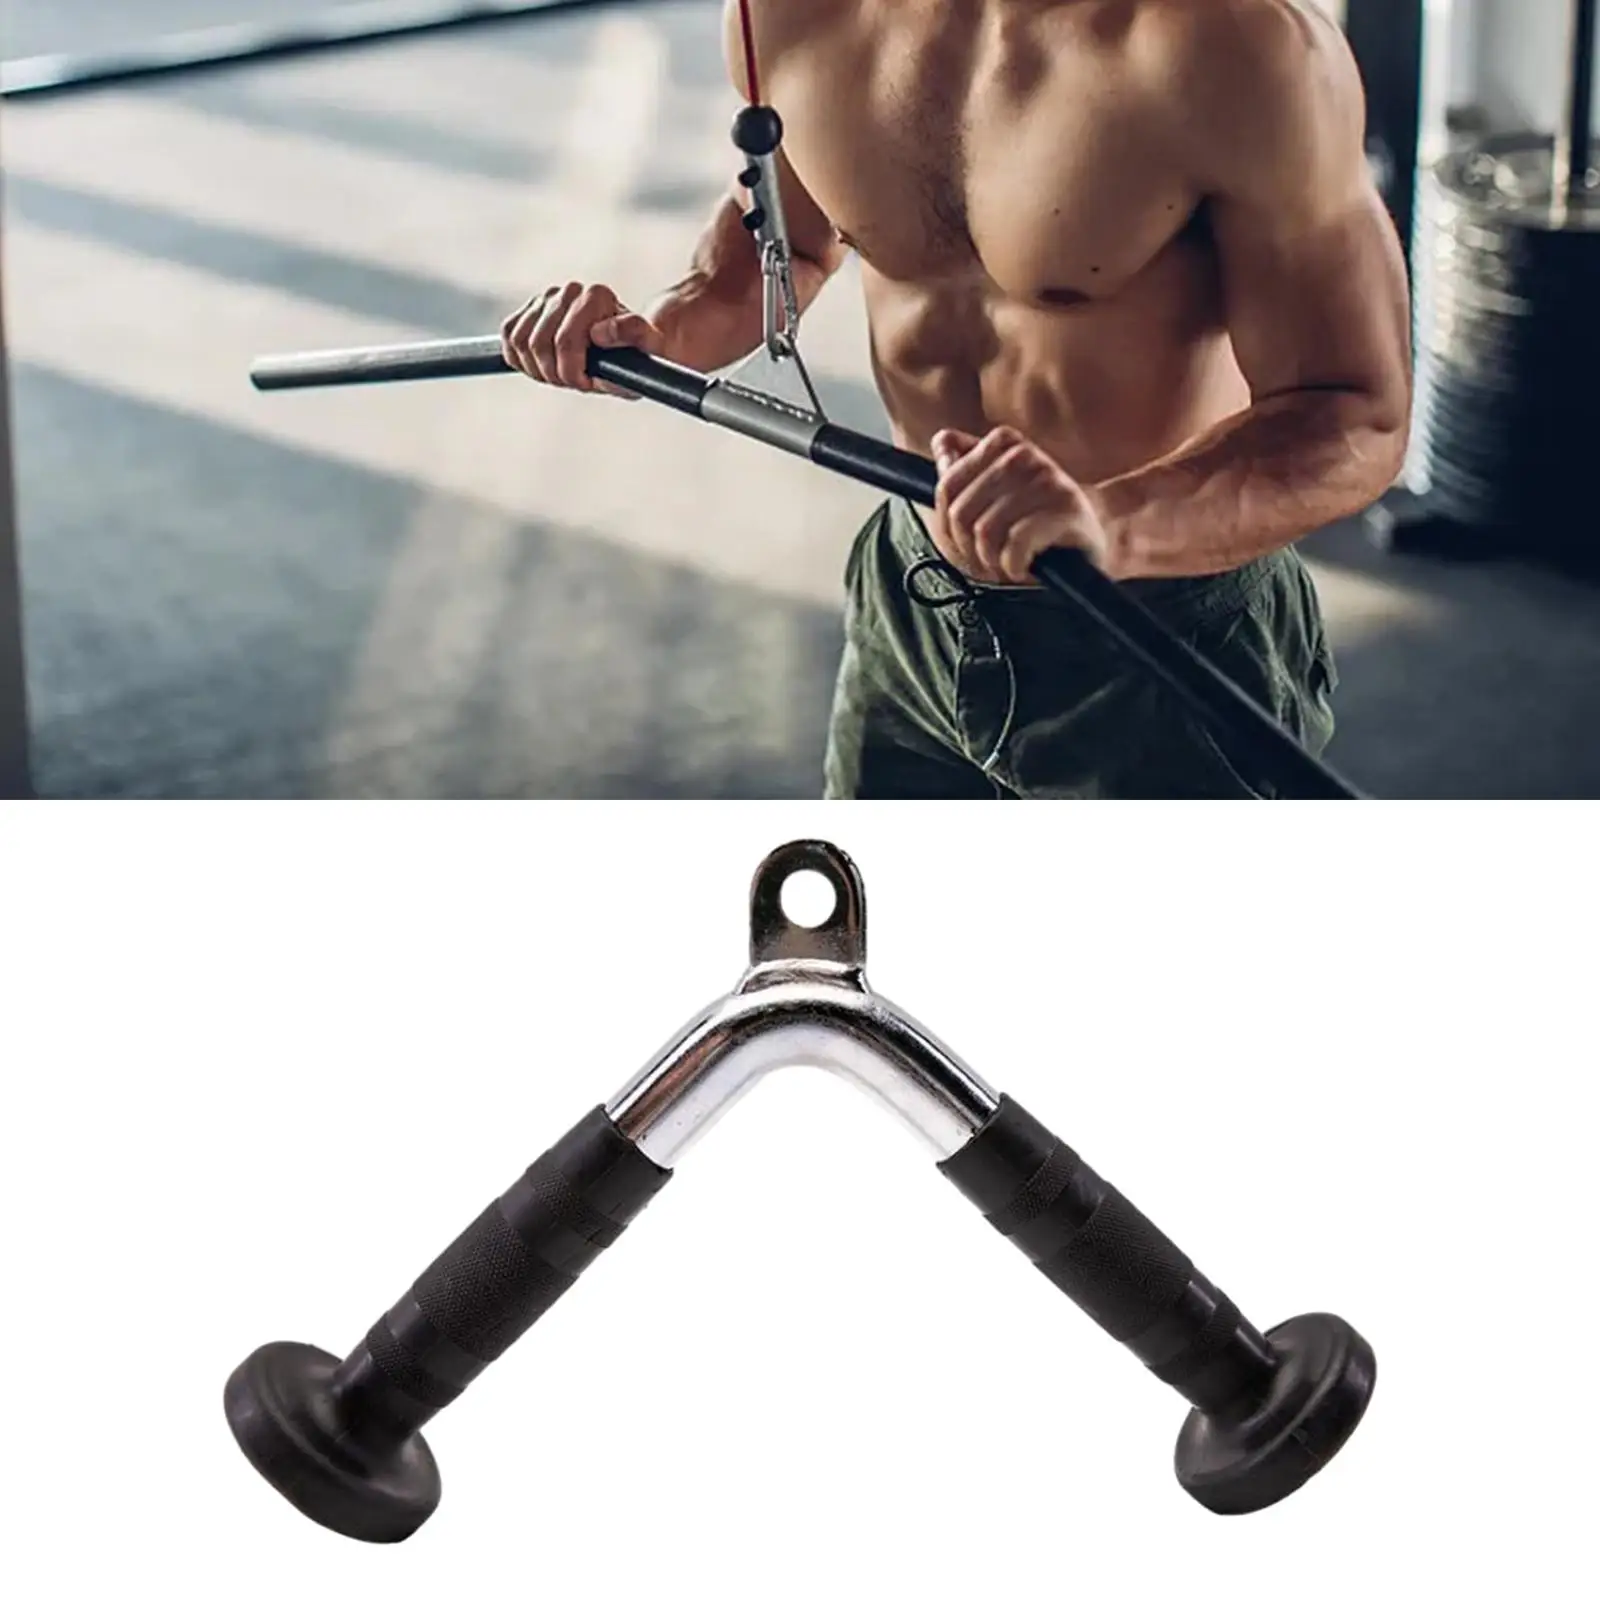 Tricep Press Push Down Bar Tricep Press V Shaped Bar for Strength Training Shoulder Biceps Exercise Fitness Weightlifting Rowing